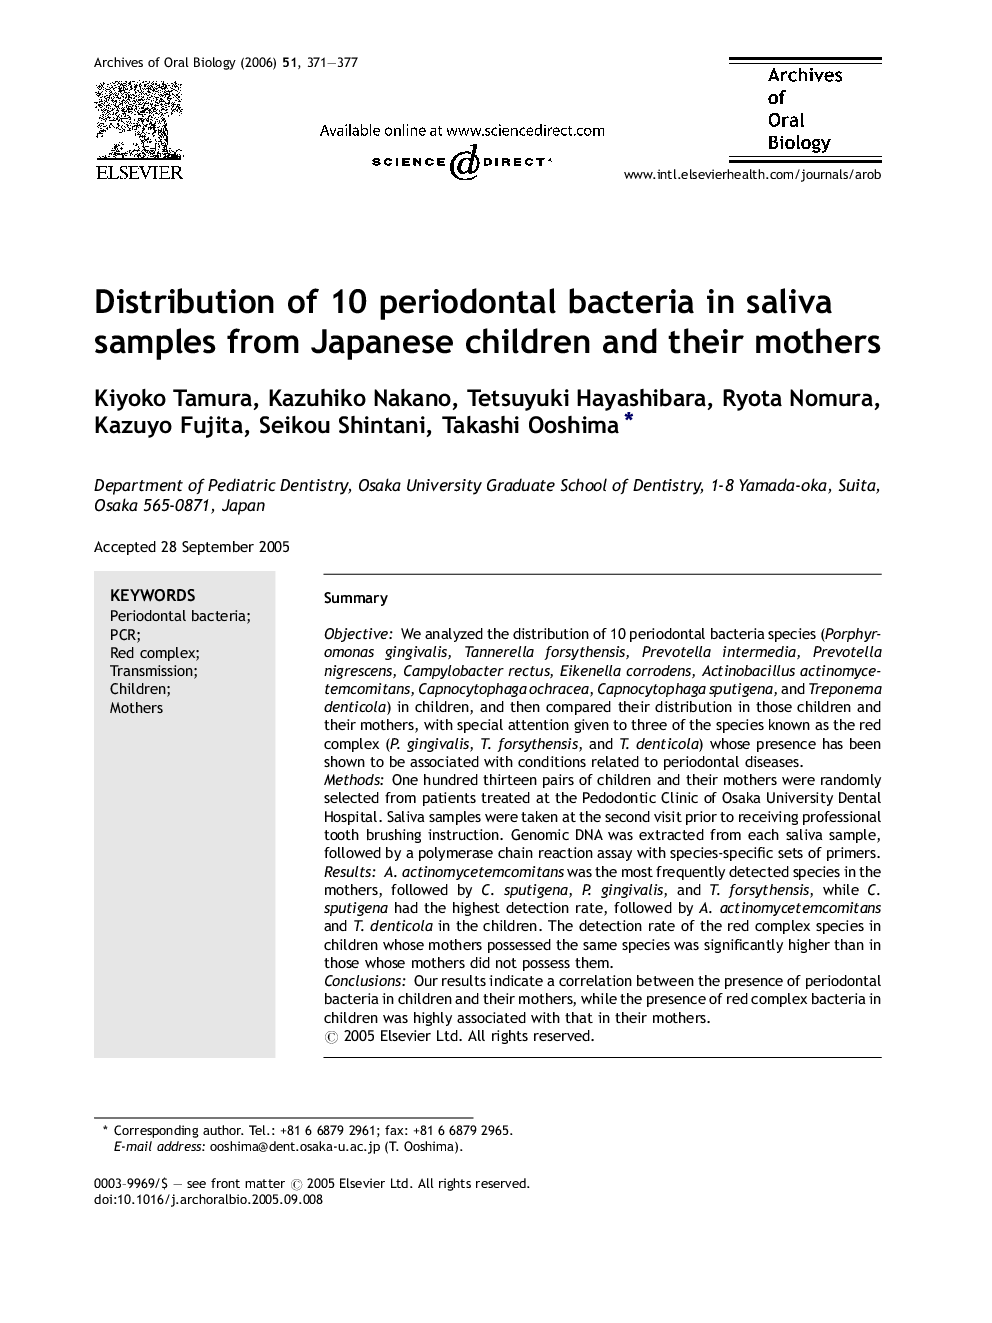 Distribution of 10 periodontal bacteria in saliva samples from Japanese children and their mothers